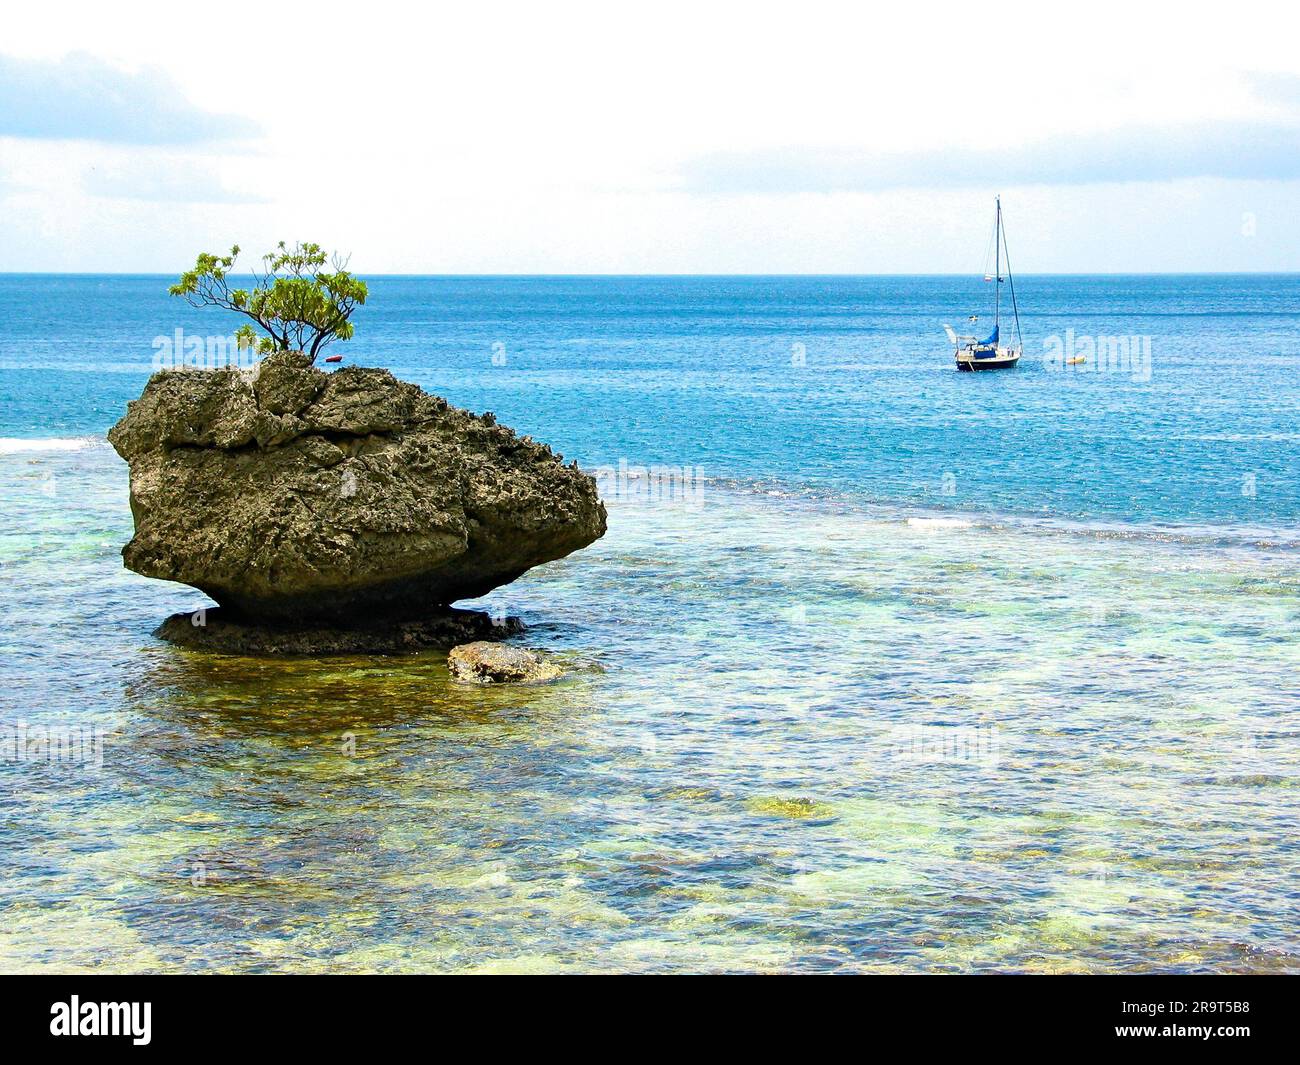 A tree on a rock and a small sailing boat anchored, seaview from Christmas Island, Indian Ocean, Australia territory. Stock Photo